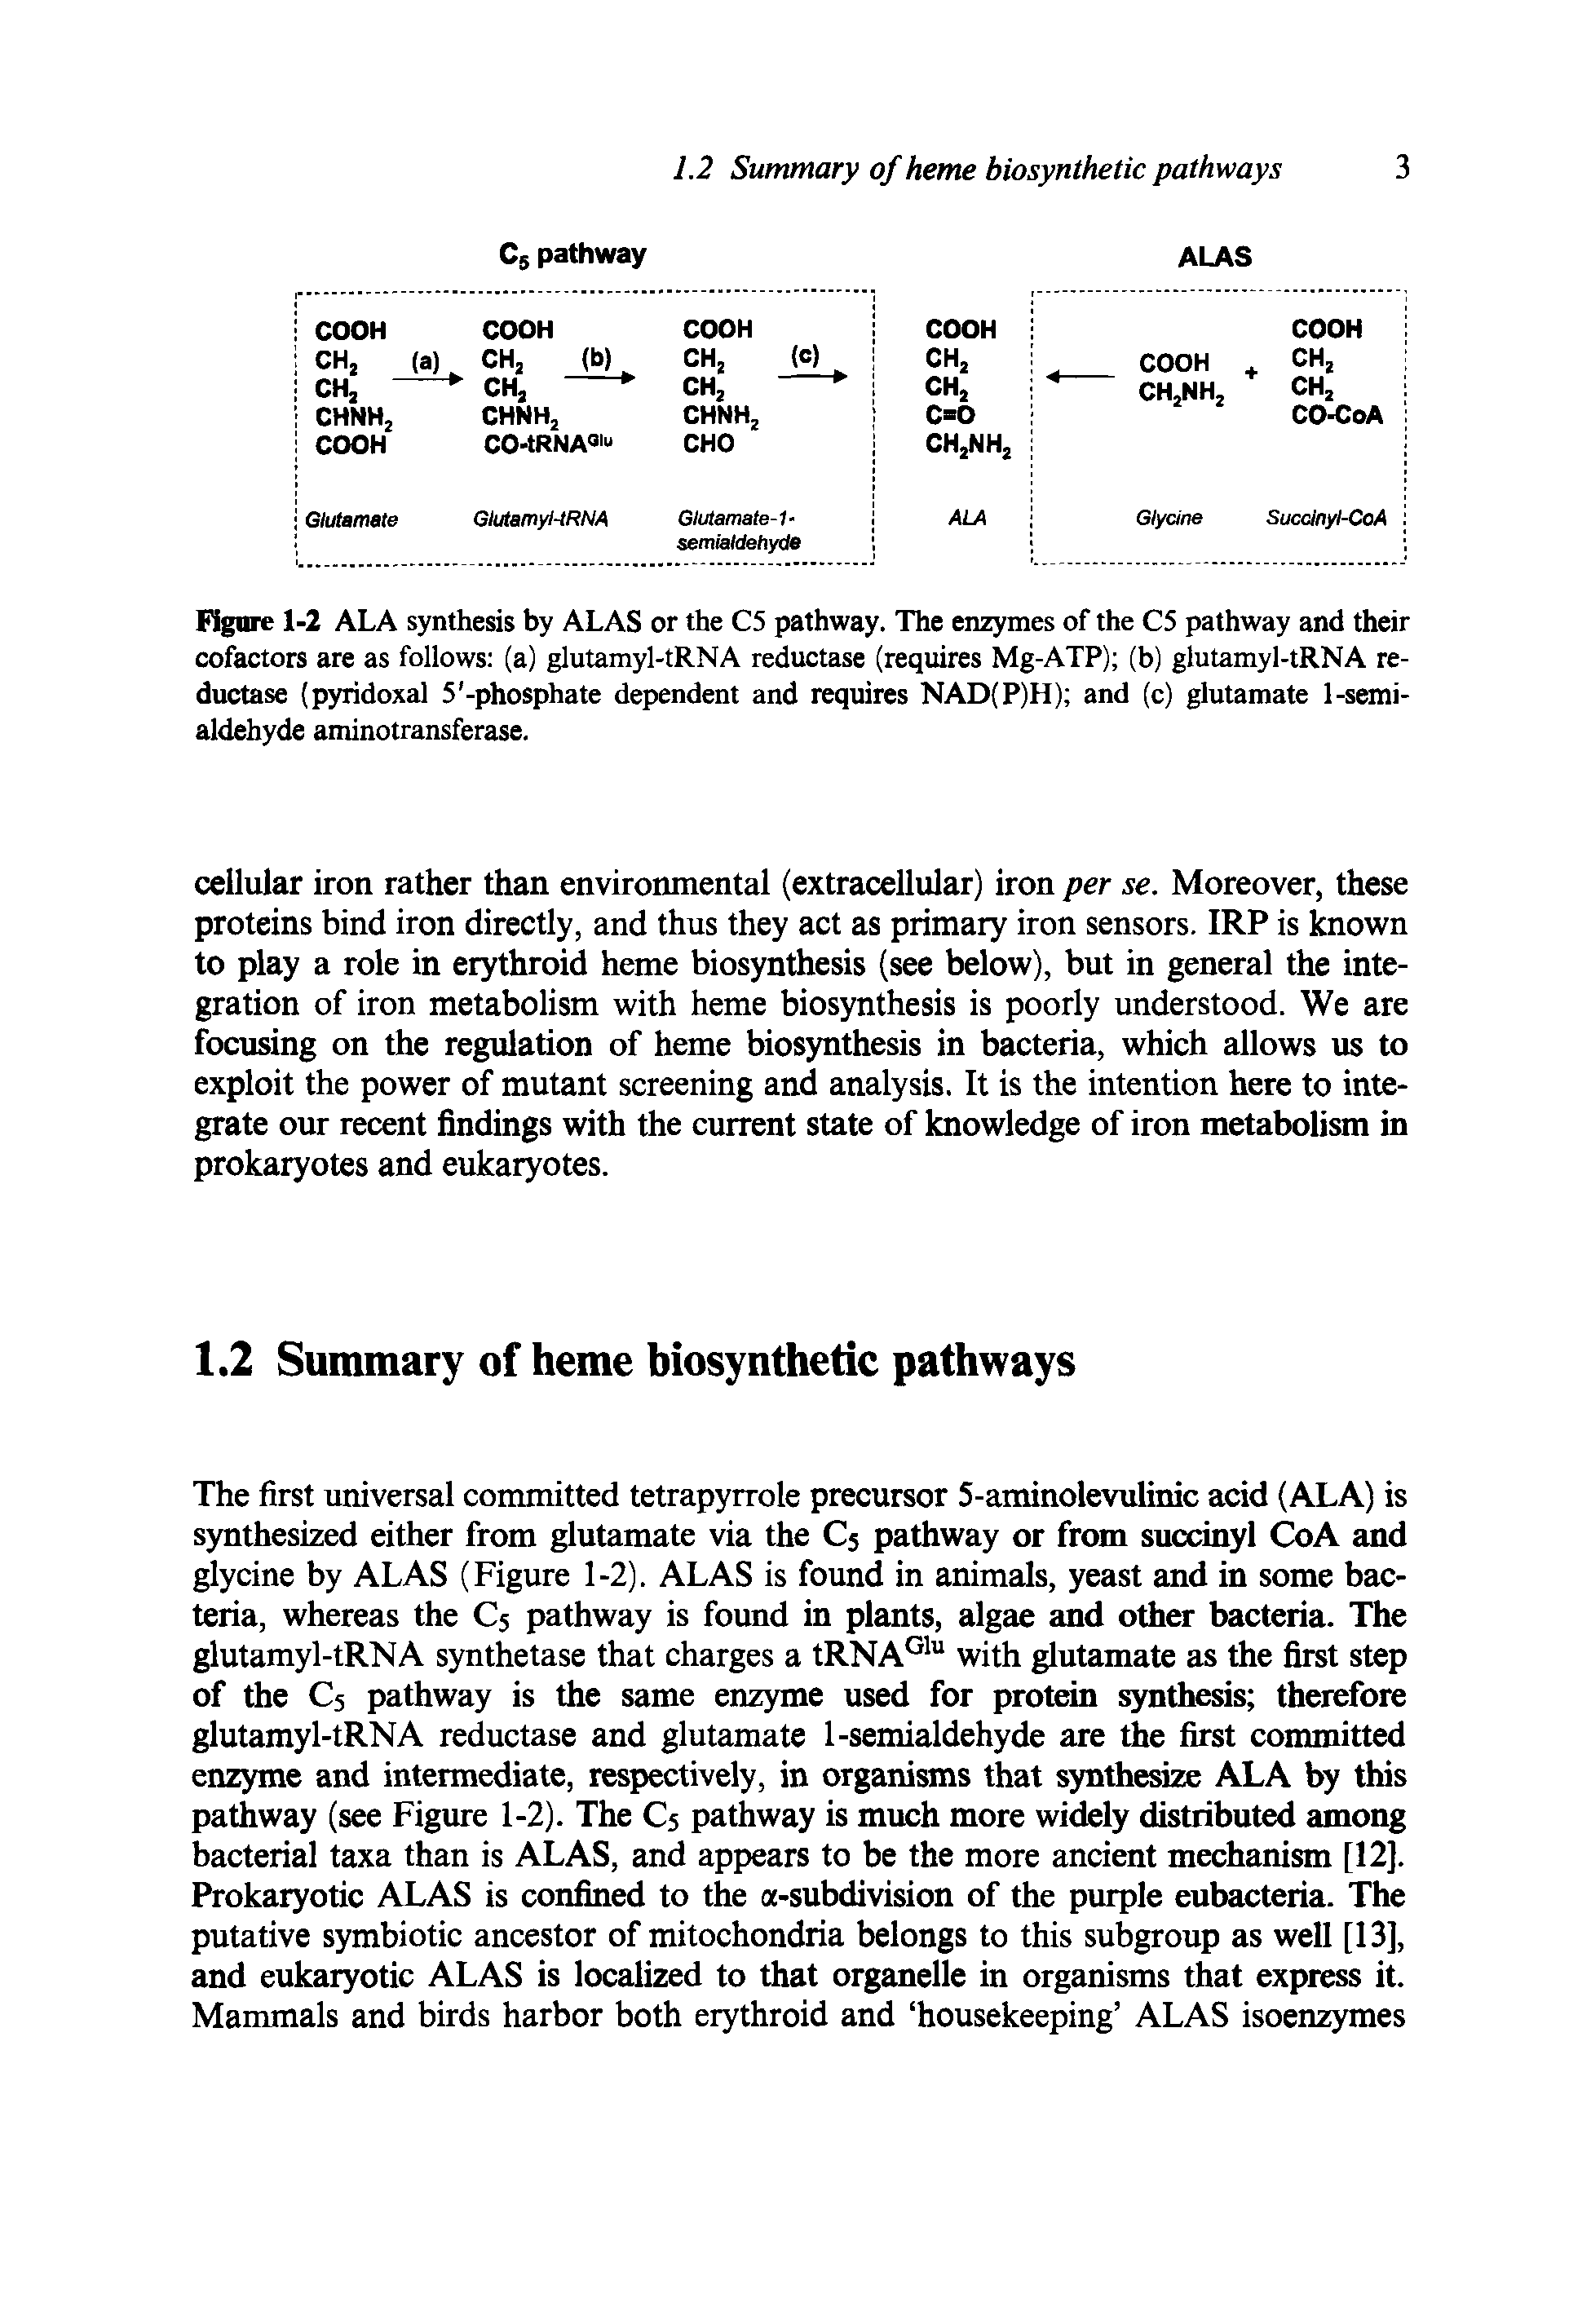 Figure 1-2 ALA synthesis by ALAS or the C5 pathway. The enzymes of the C5 pathway and their cofactors are as follows (a) glutamyl-tRNA reductase (requires Mg-ATP) (b) glutamyl-tRNA reductase (pyridoxal 5 -phosphate dependent and requires NAD(P)H) and (c) glutamate 1-semialdehyde aminotransferase.